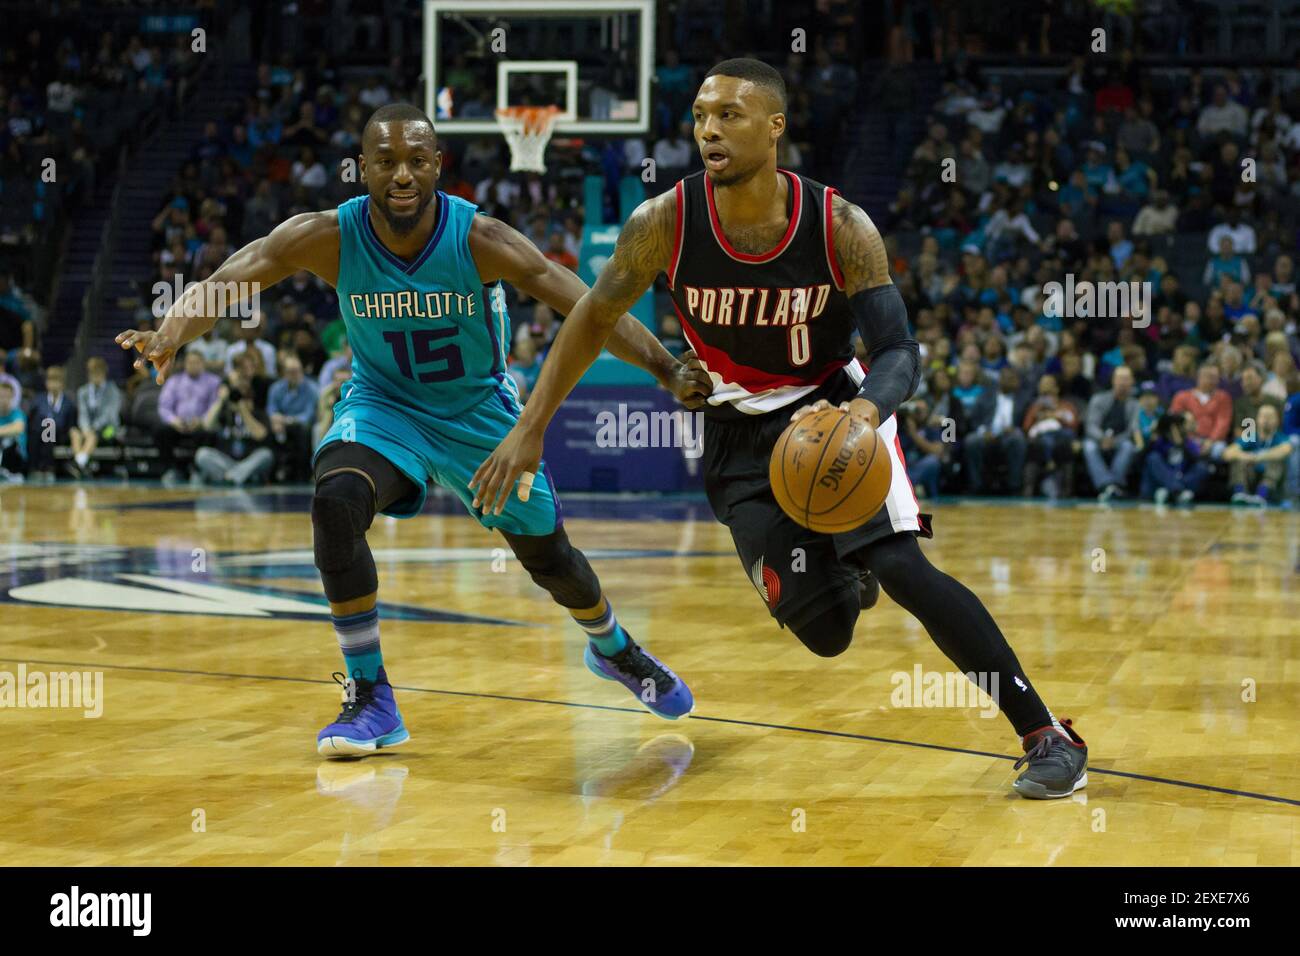 Nov 15, 2015; Charlotte, NC, USA; Portland Trail Blazers guard Damian  Lillard (0) drives the ball while Charlotte Hornets guard Kemba Walker (15)  defends during the first half at Time Warner Cable